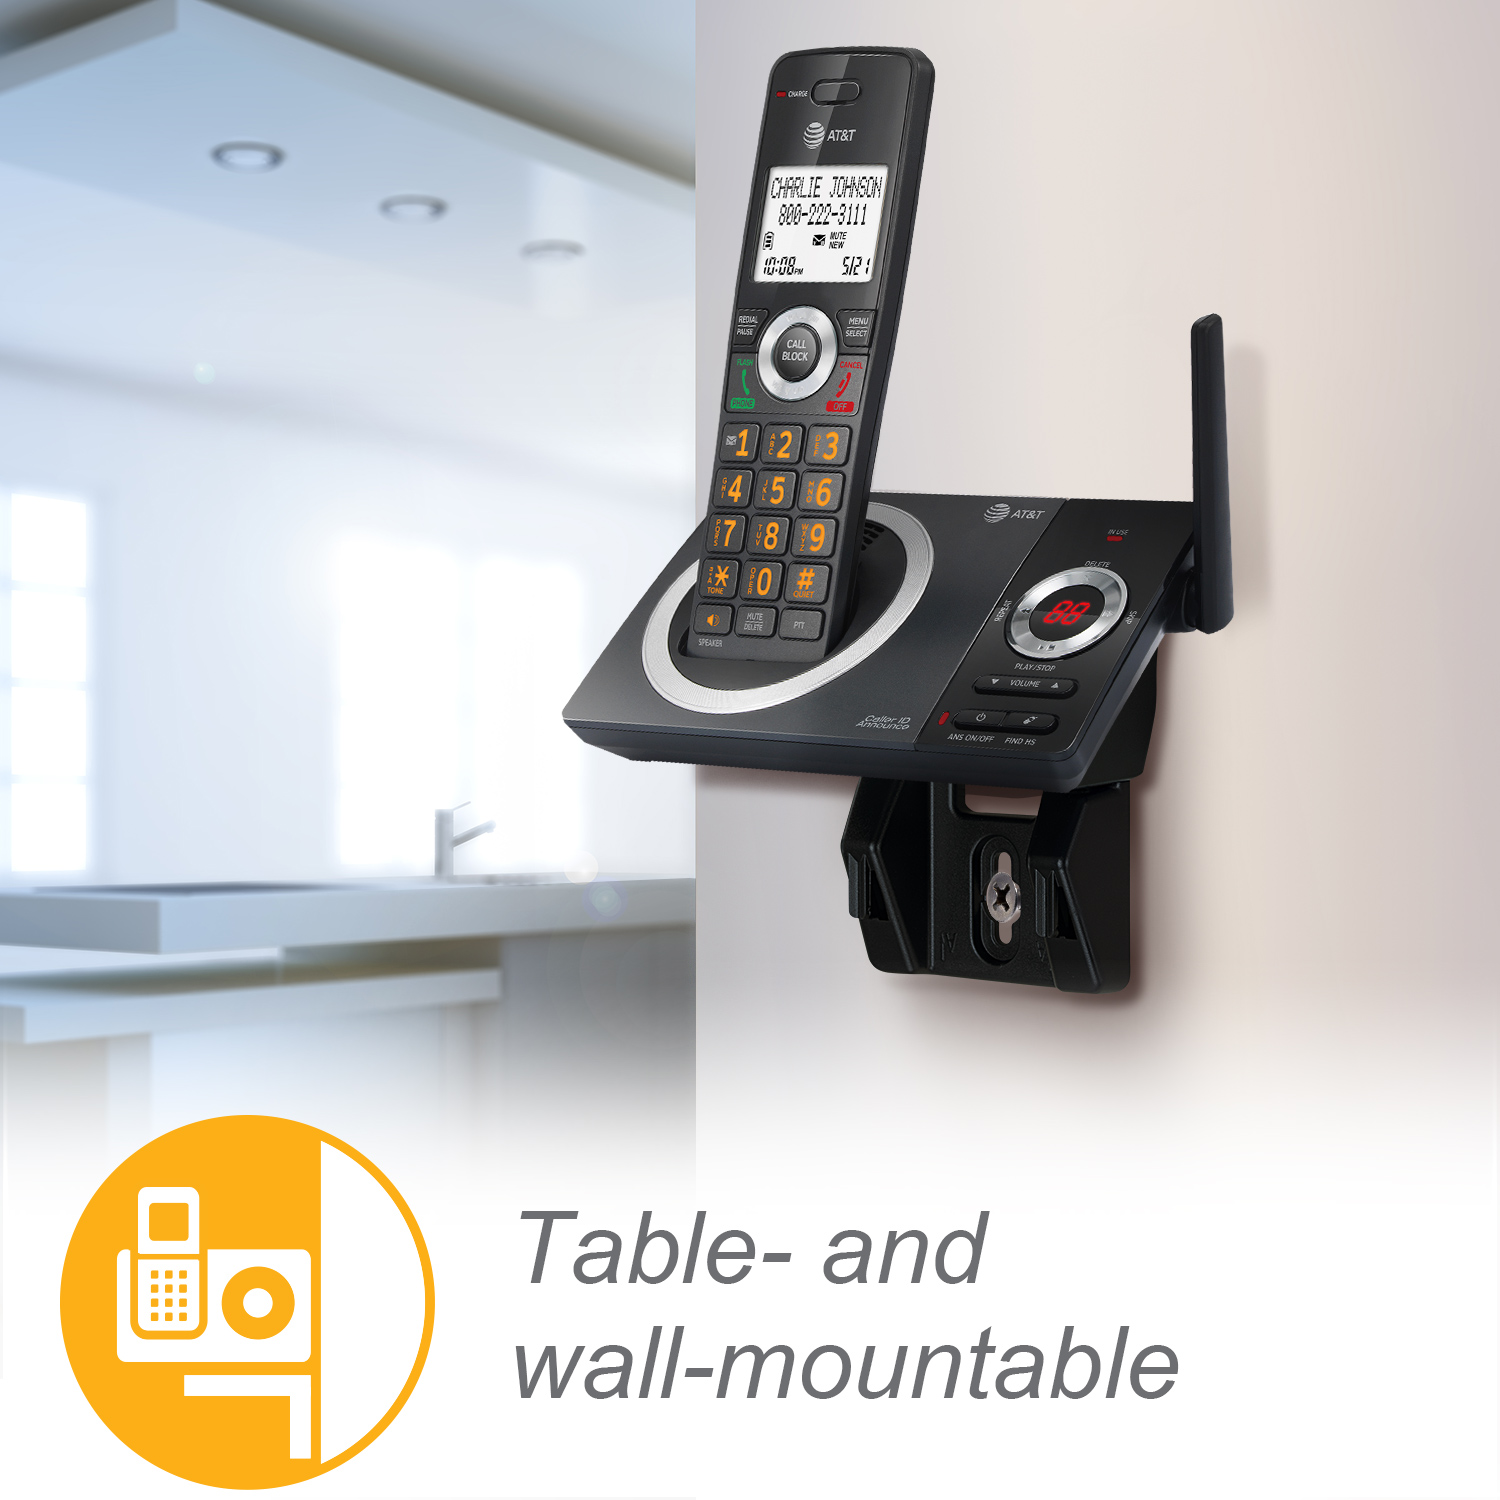 5-Handset Expandable Cordless Phone with Unsurpassed Range, Smart Call Blocker and Answering System - view 12